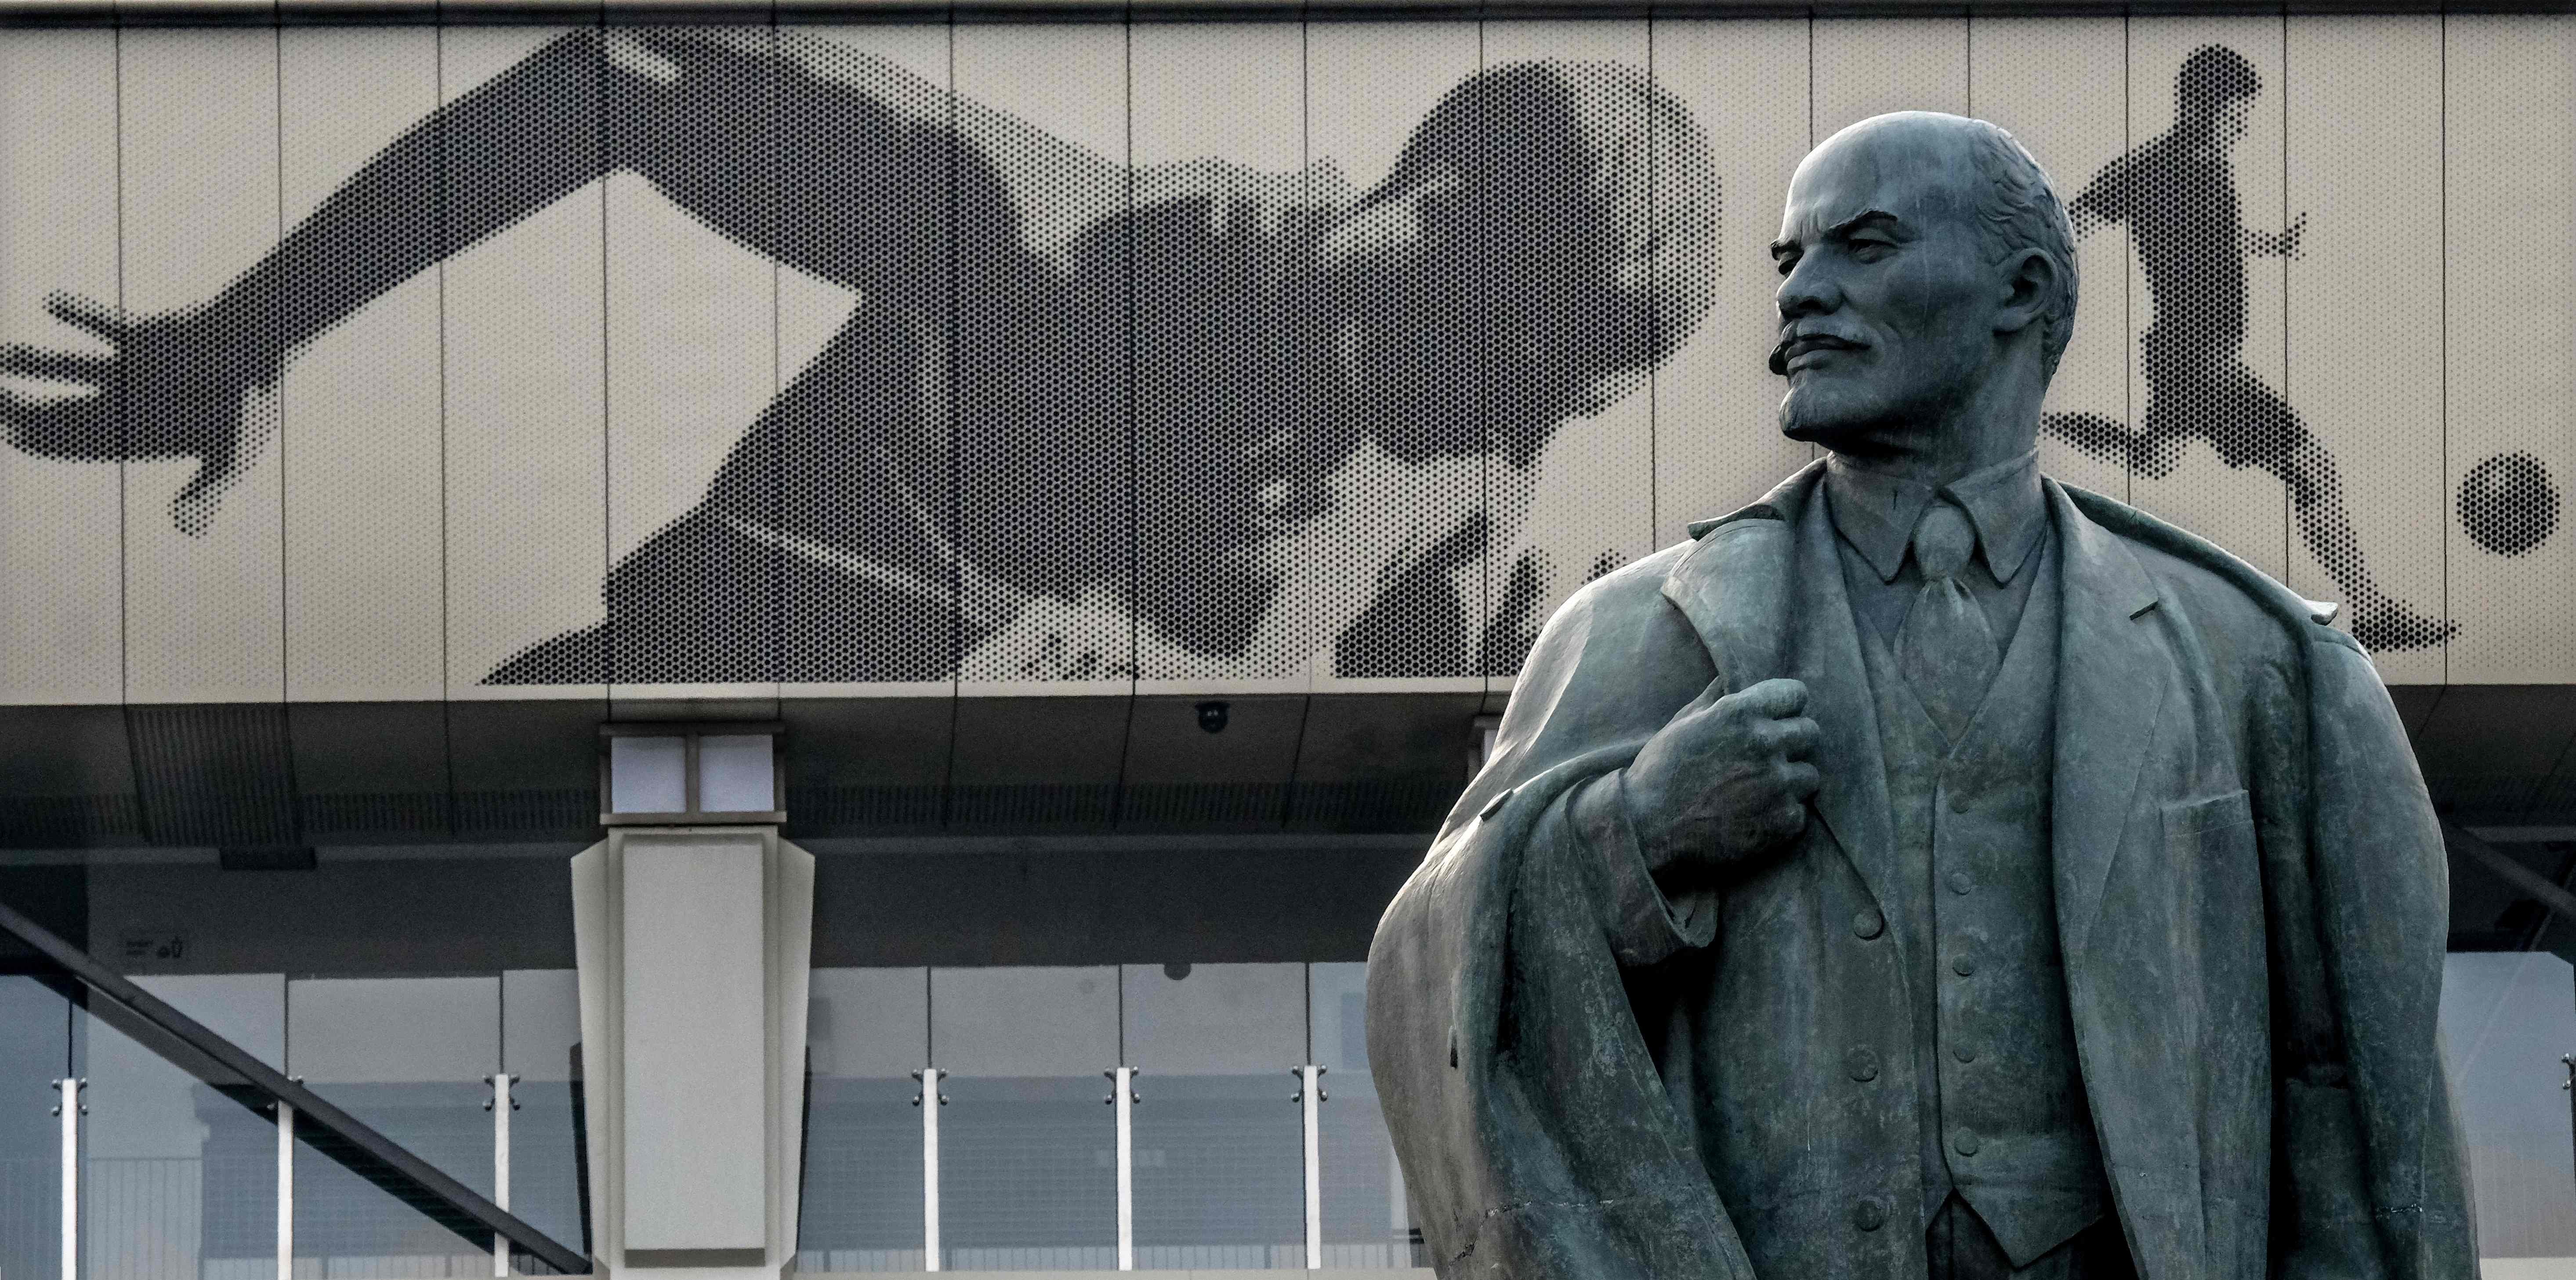 A statue of Soviet leader Vladimir Lenin stands in front of the Luzhniki stadium in Moscow. Photo: AFP